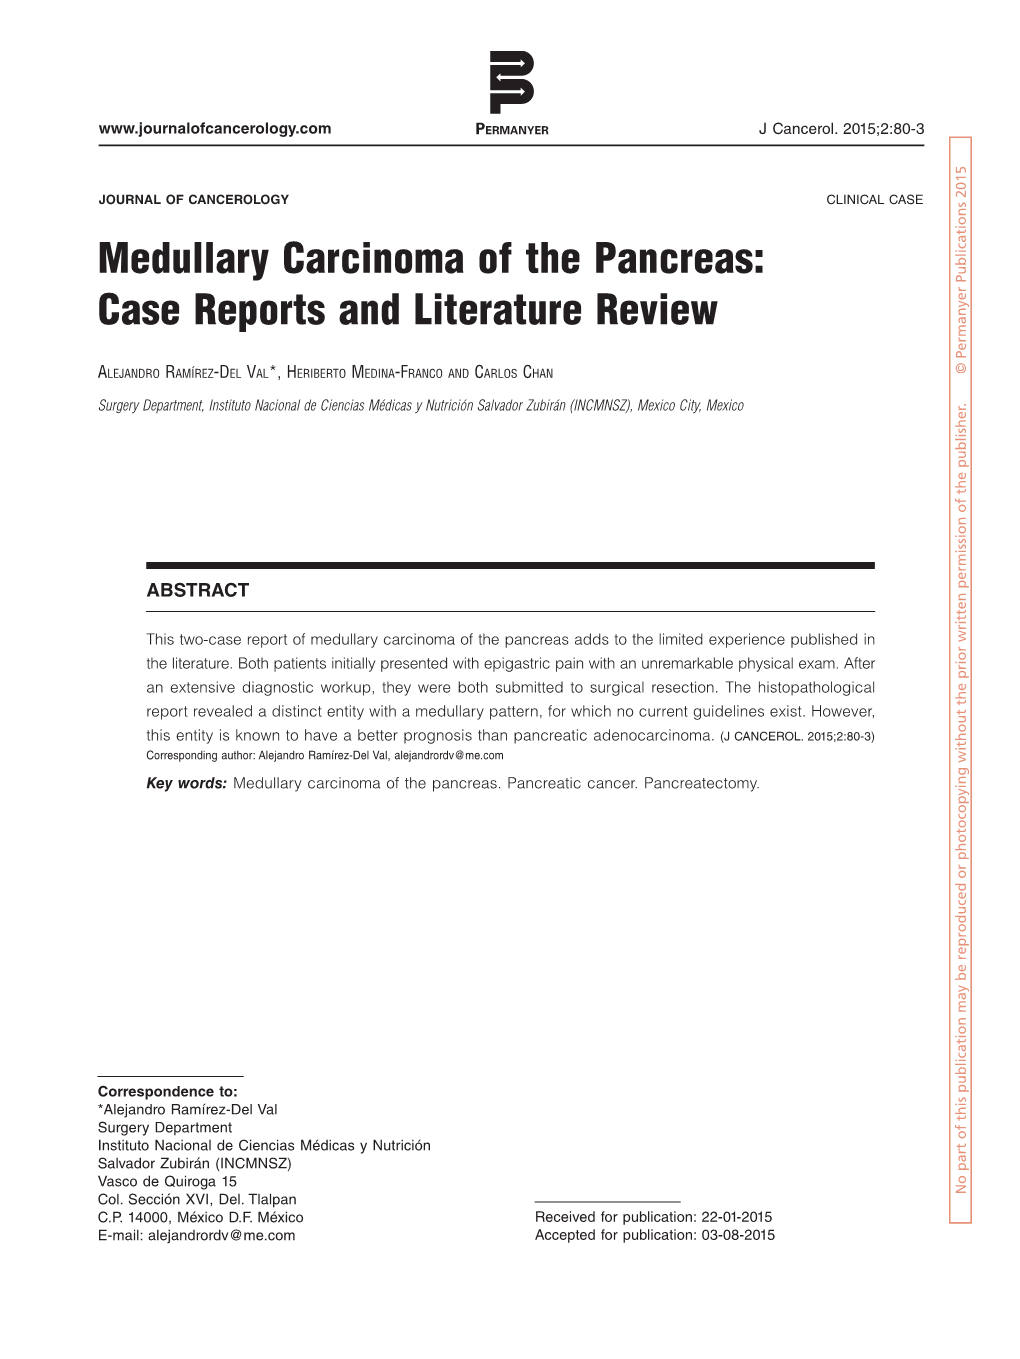 Medullary Carcinoma of the Pancreas: Case Reports and Literature Review